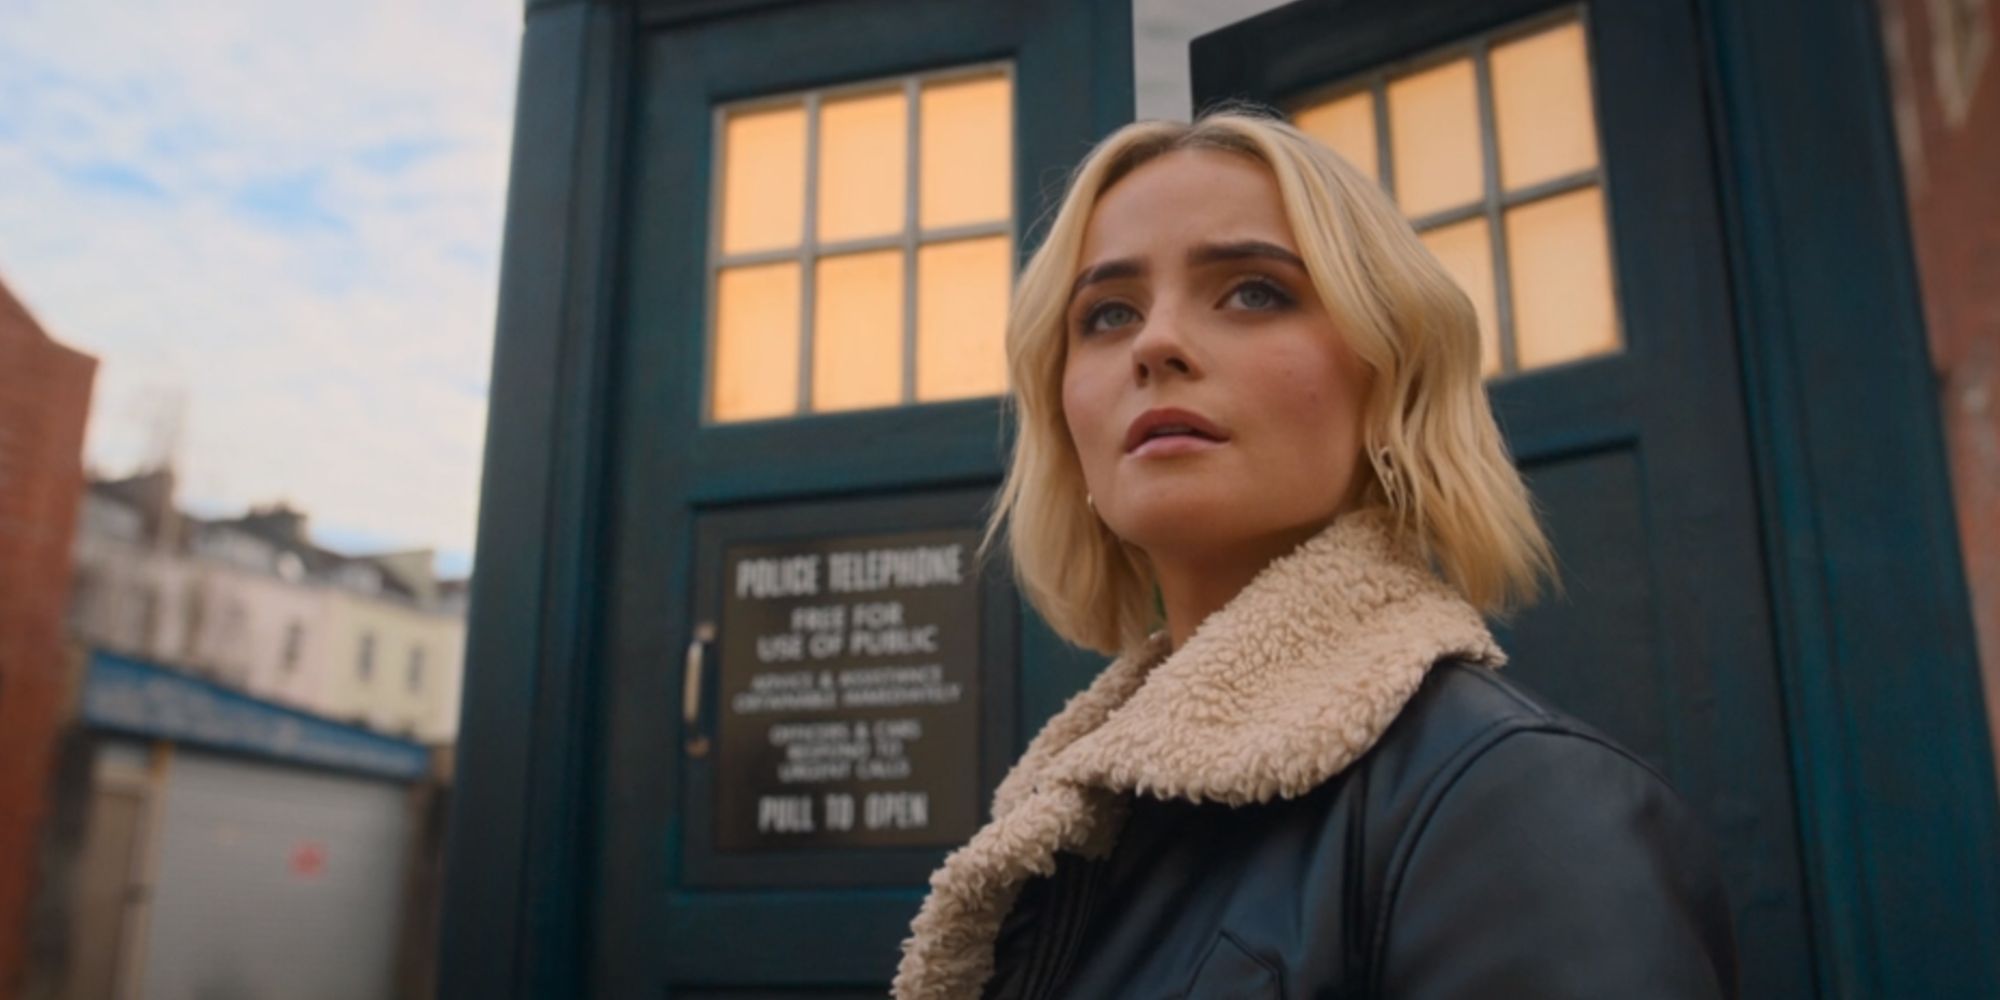 Doctor Who Season 14 Clip Shows Ruby Sunday's Unexpected Transformation Into Butterfly-Like Creature